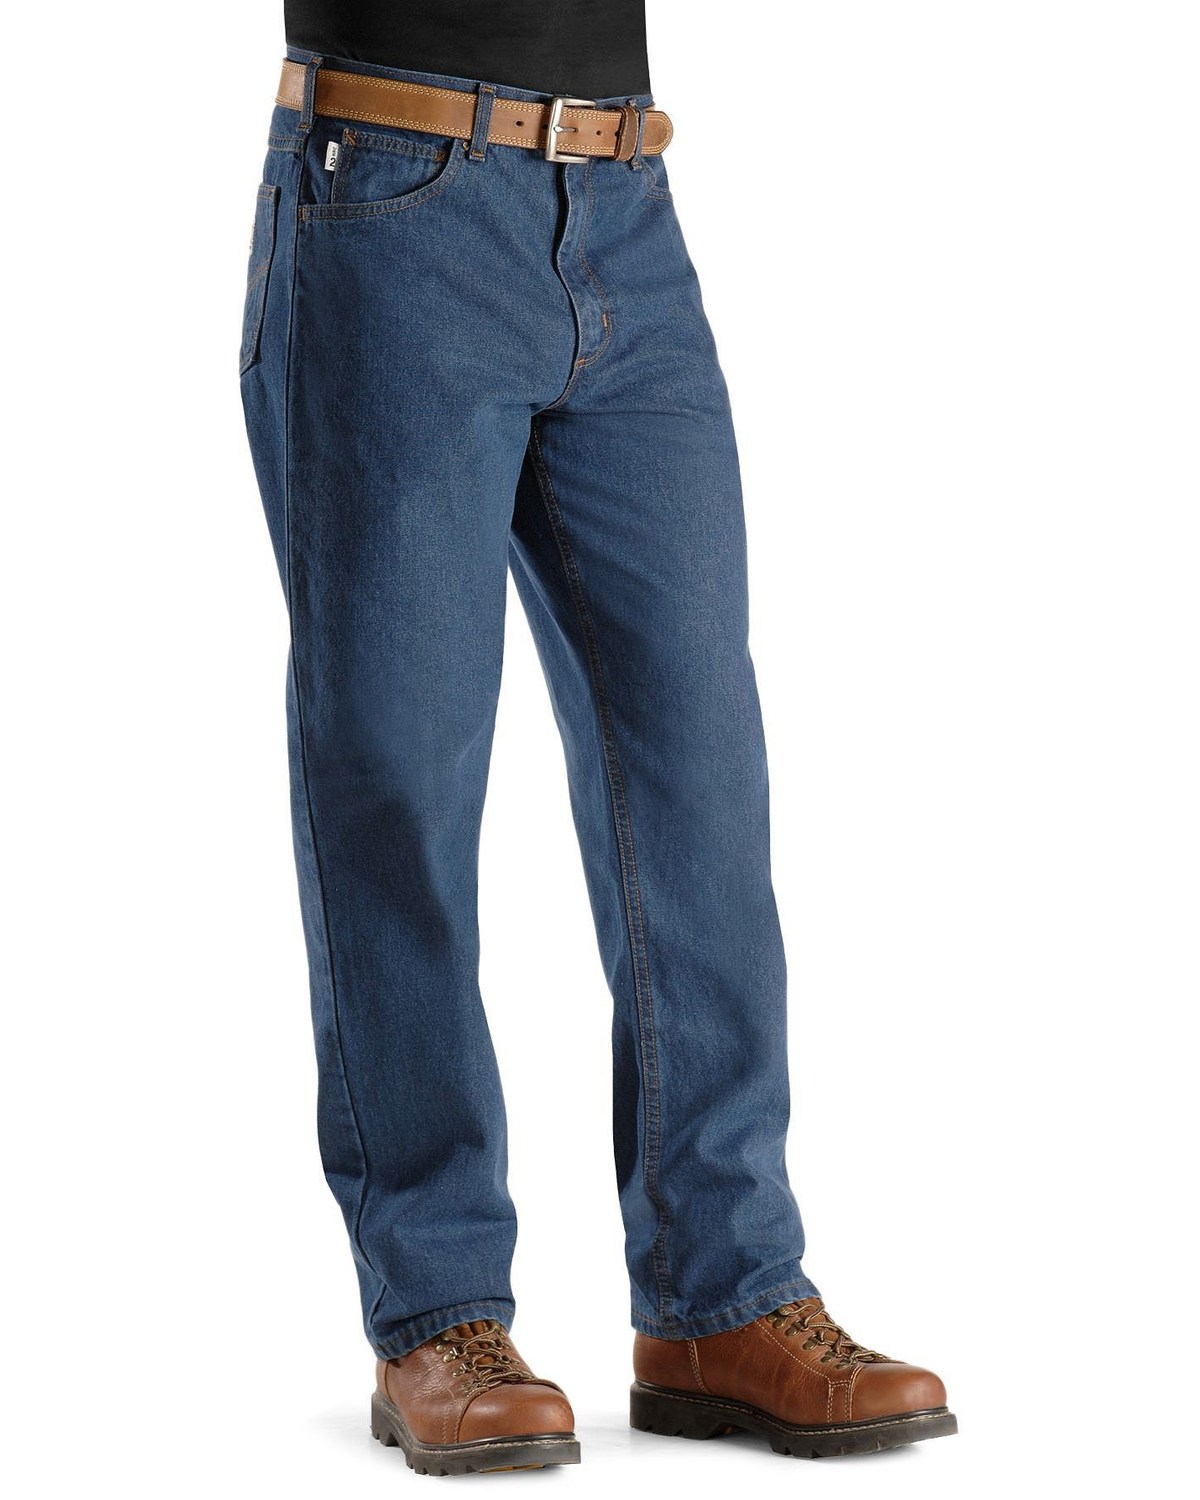 Carhartt Flame Resistant Relaxed Fit Work Jean | Boot Barn